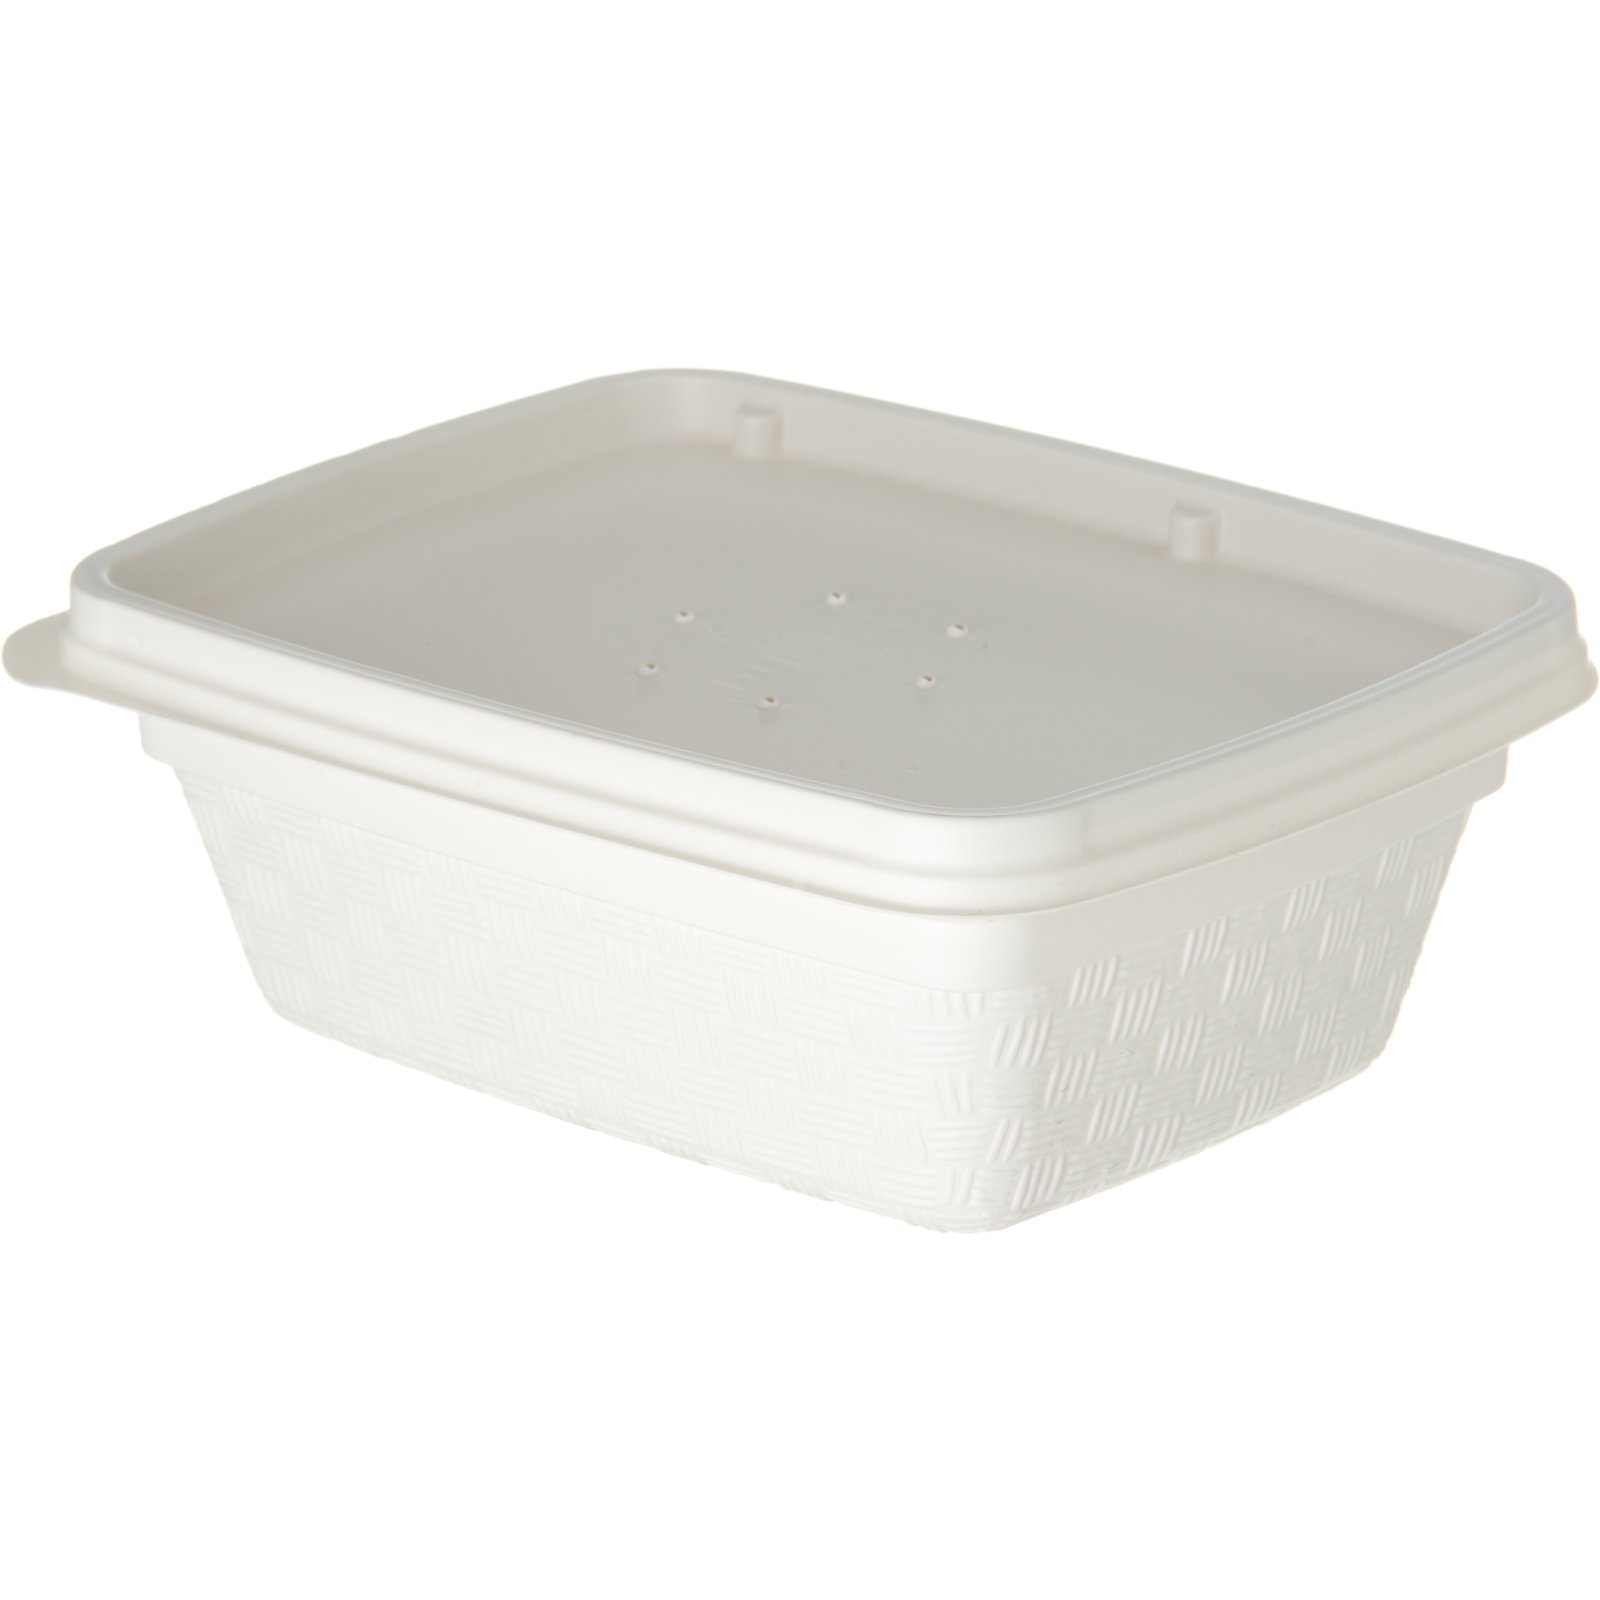 Soup Bowl with Vented Lid at Menards®